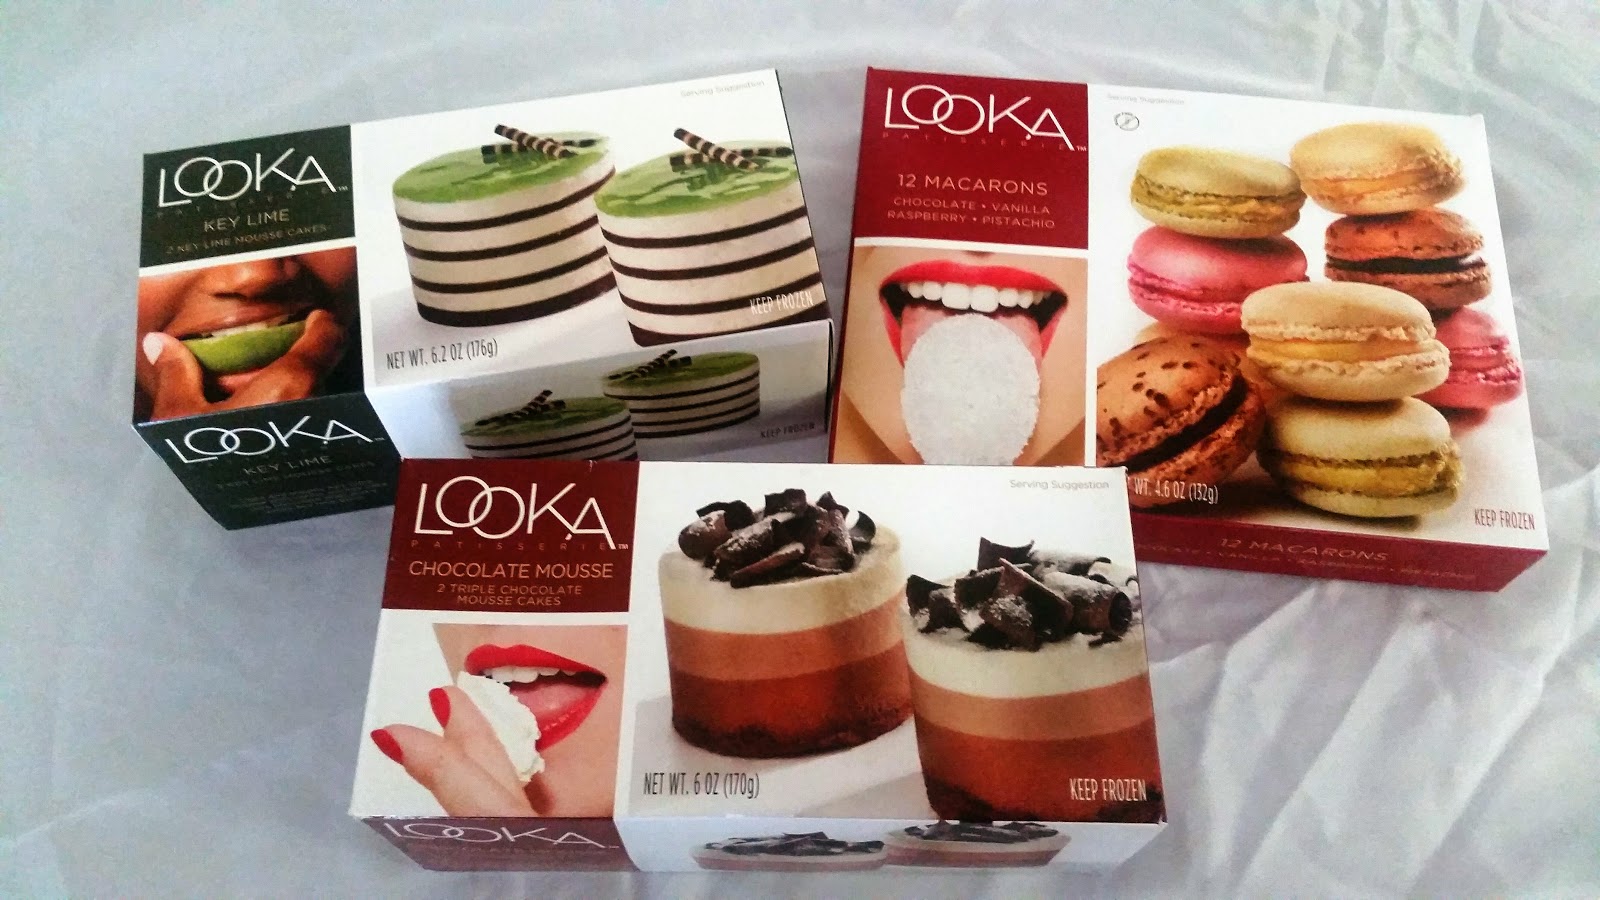 LOOKA Patisserie French Desserts Review and Giveaway Ends 7/14 via ProductReviewMom.com #frenchdesserts